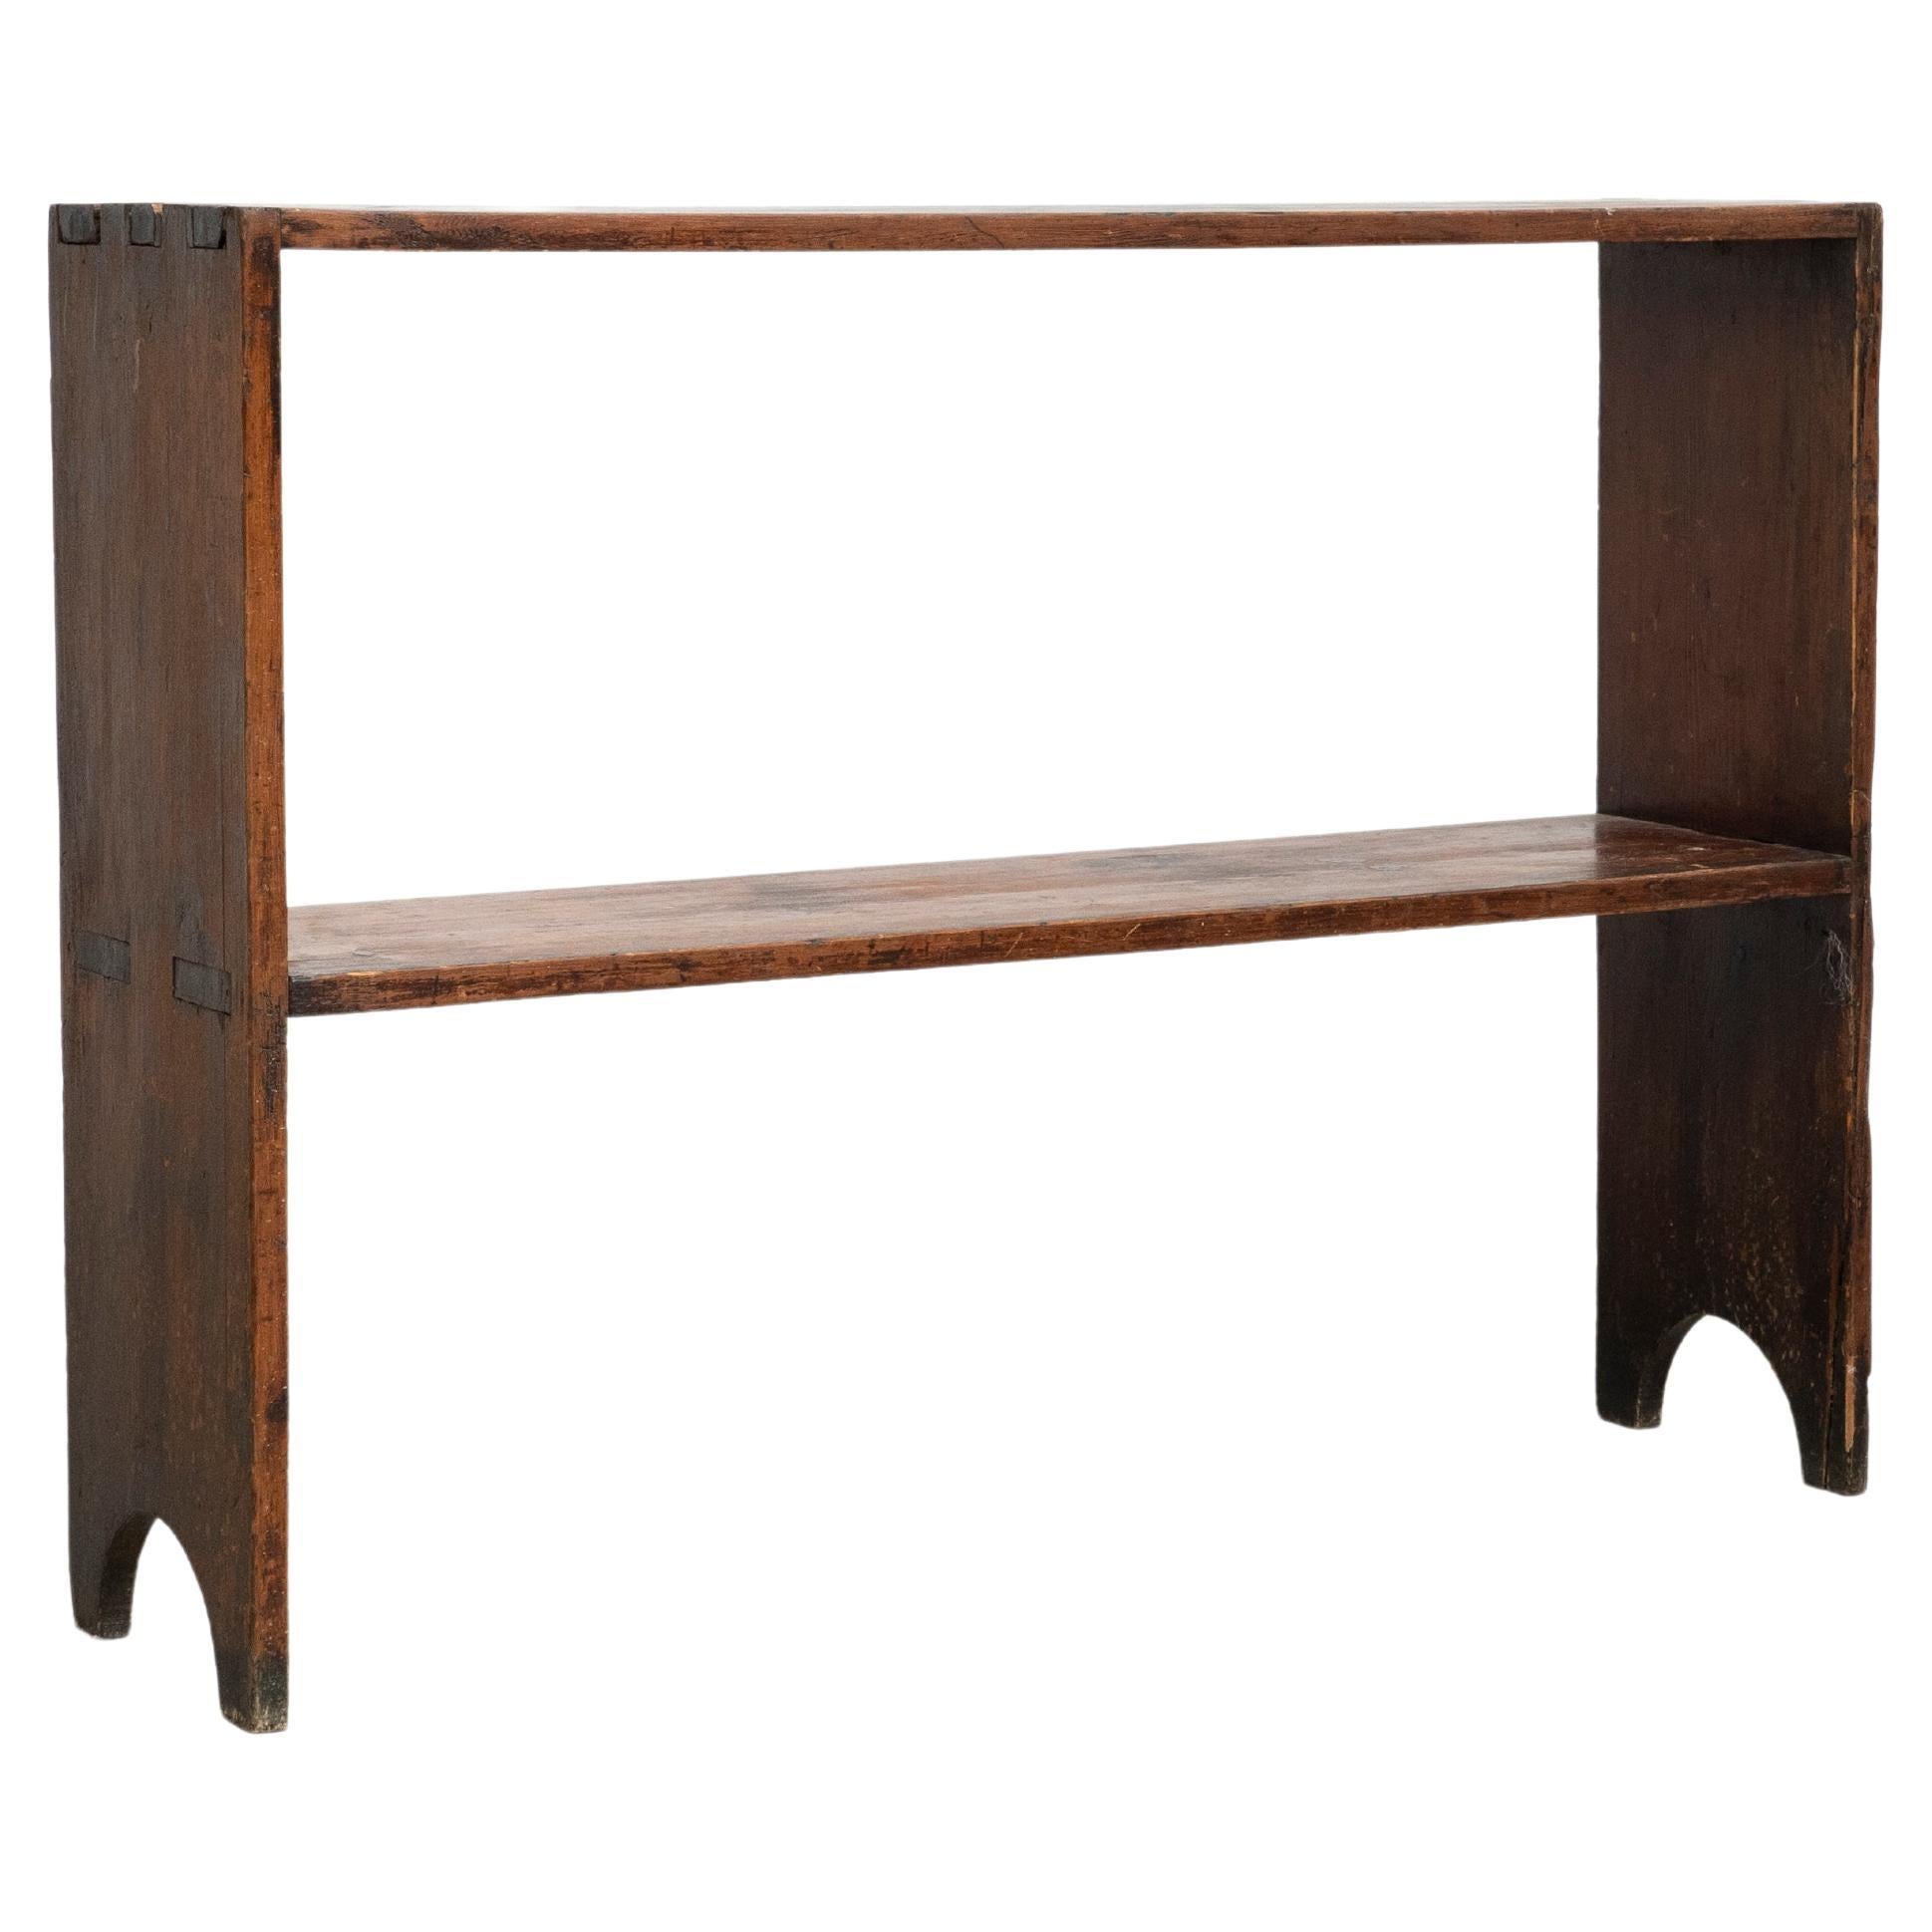 Early 20th Century Rustic Solid Wood Shelves For Sale